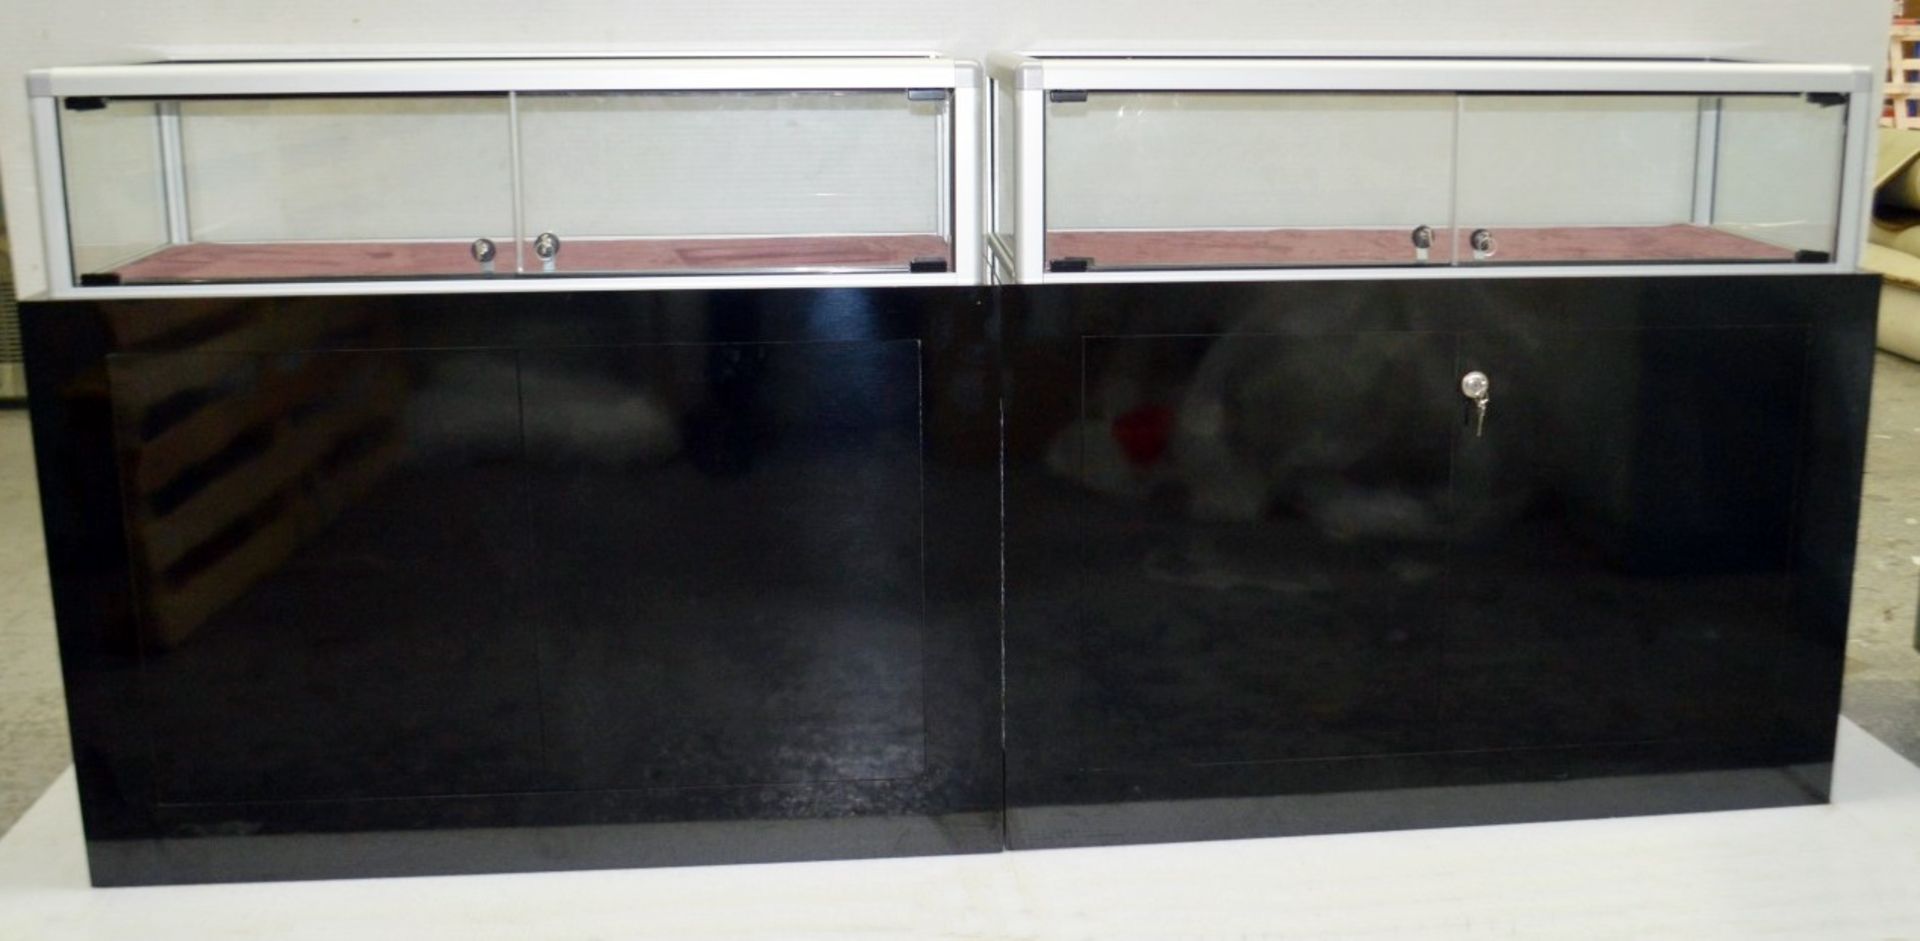 Pair Of Retail Counters With Lockable Display Cabinets And Undercounter Storage - Image 4 of 9